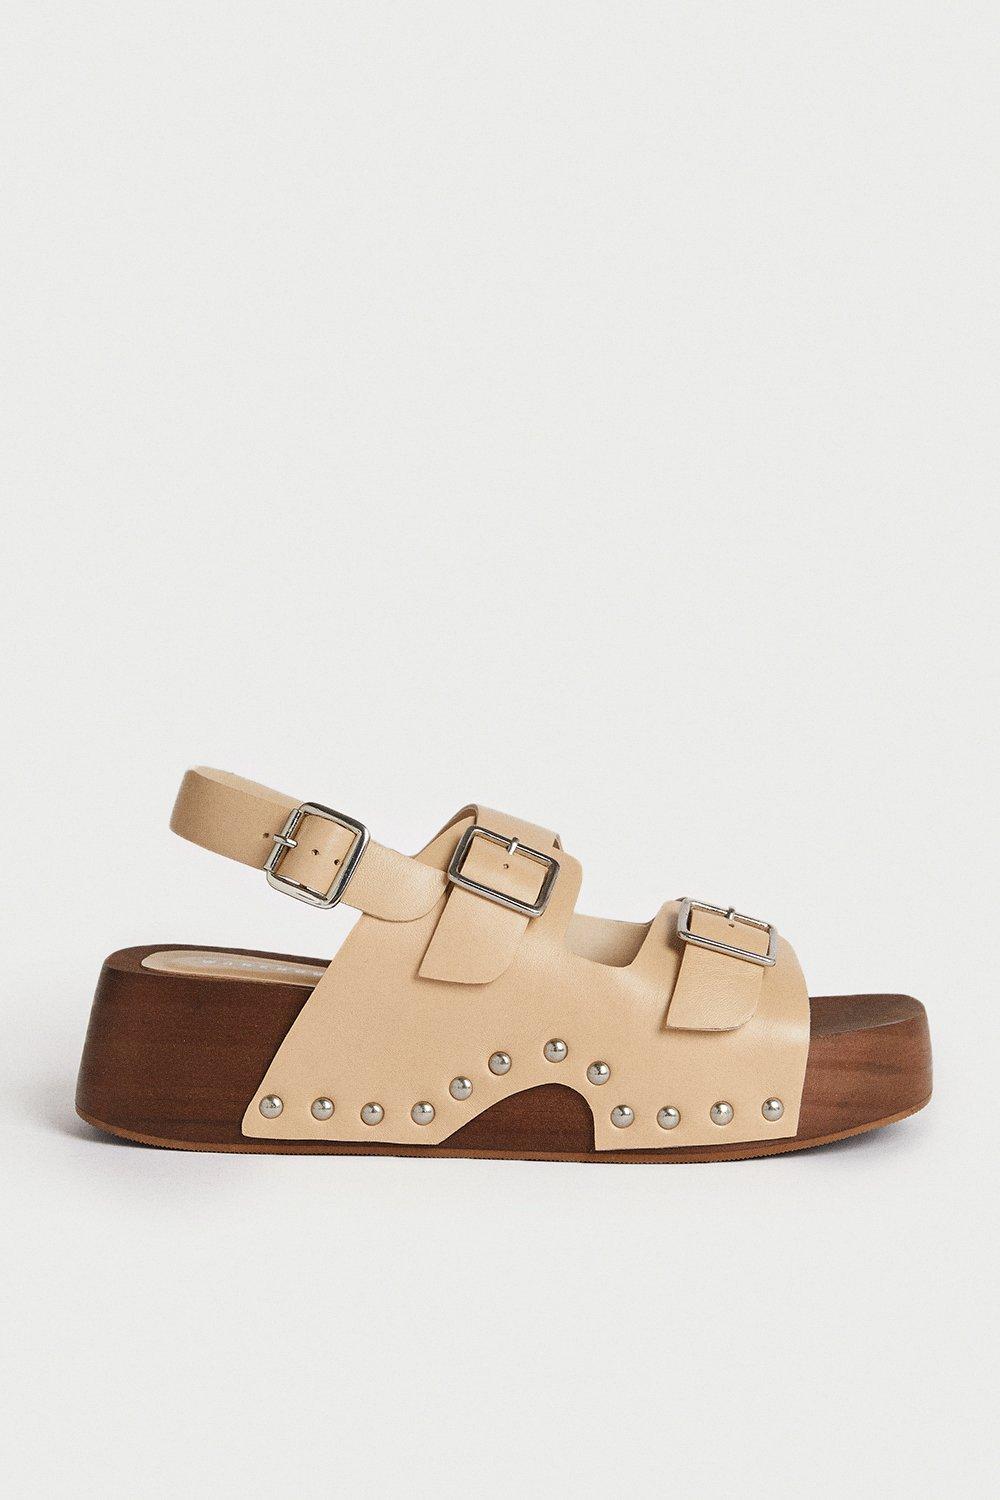 Womens Real Leather Buckle Studded Clog - cream